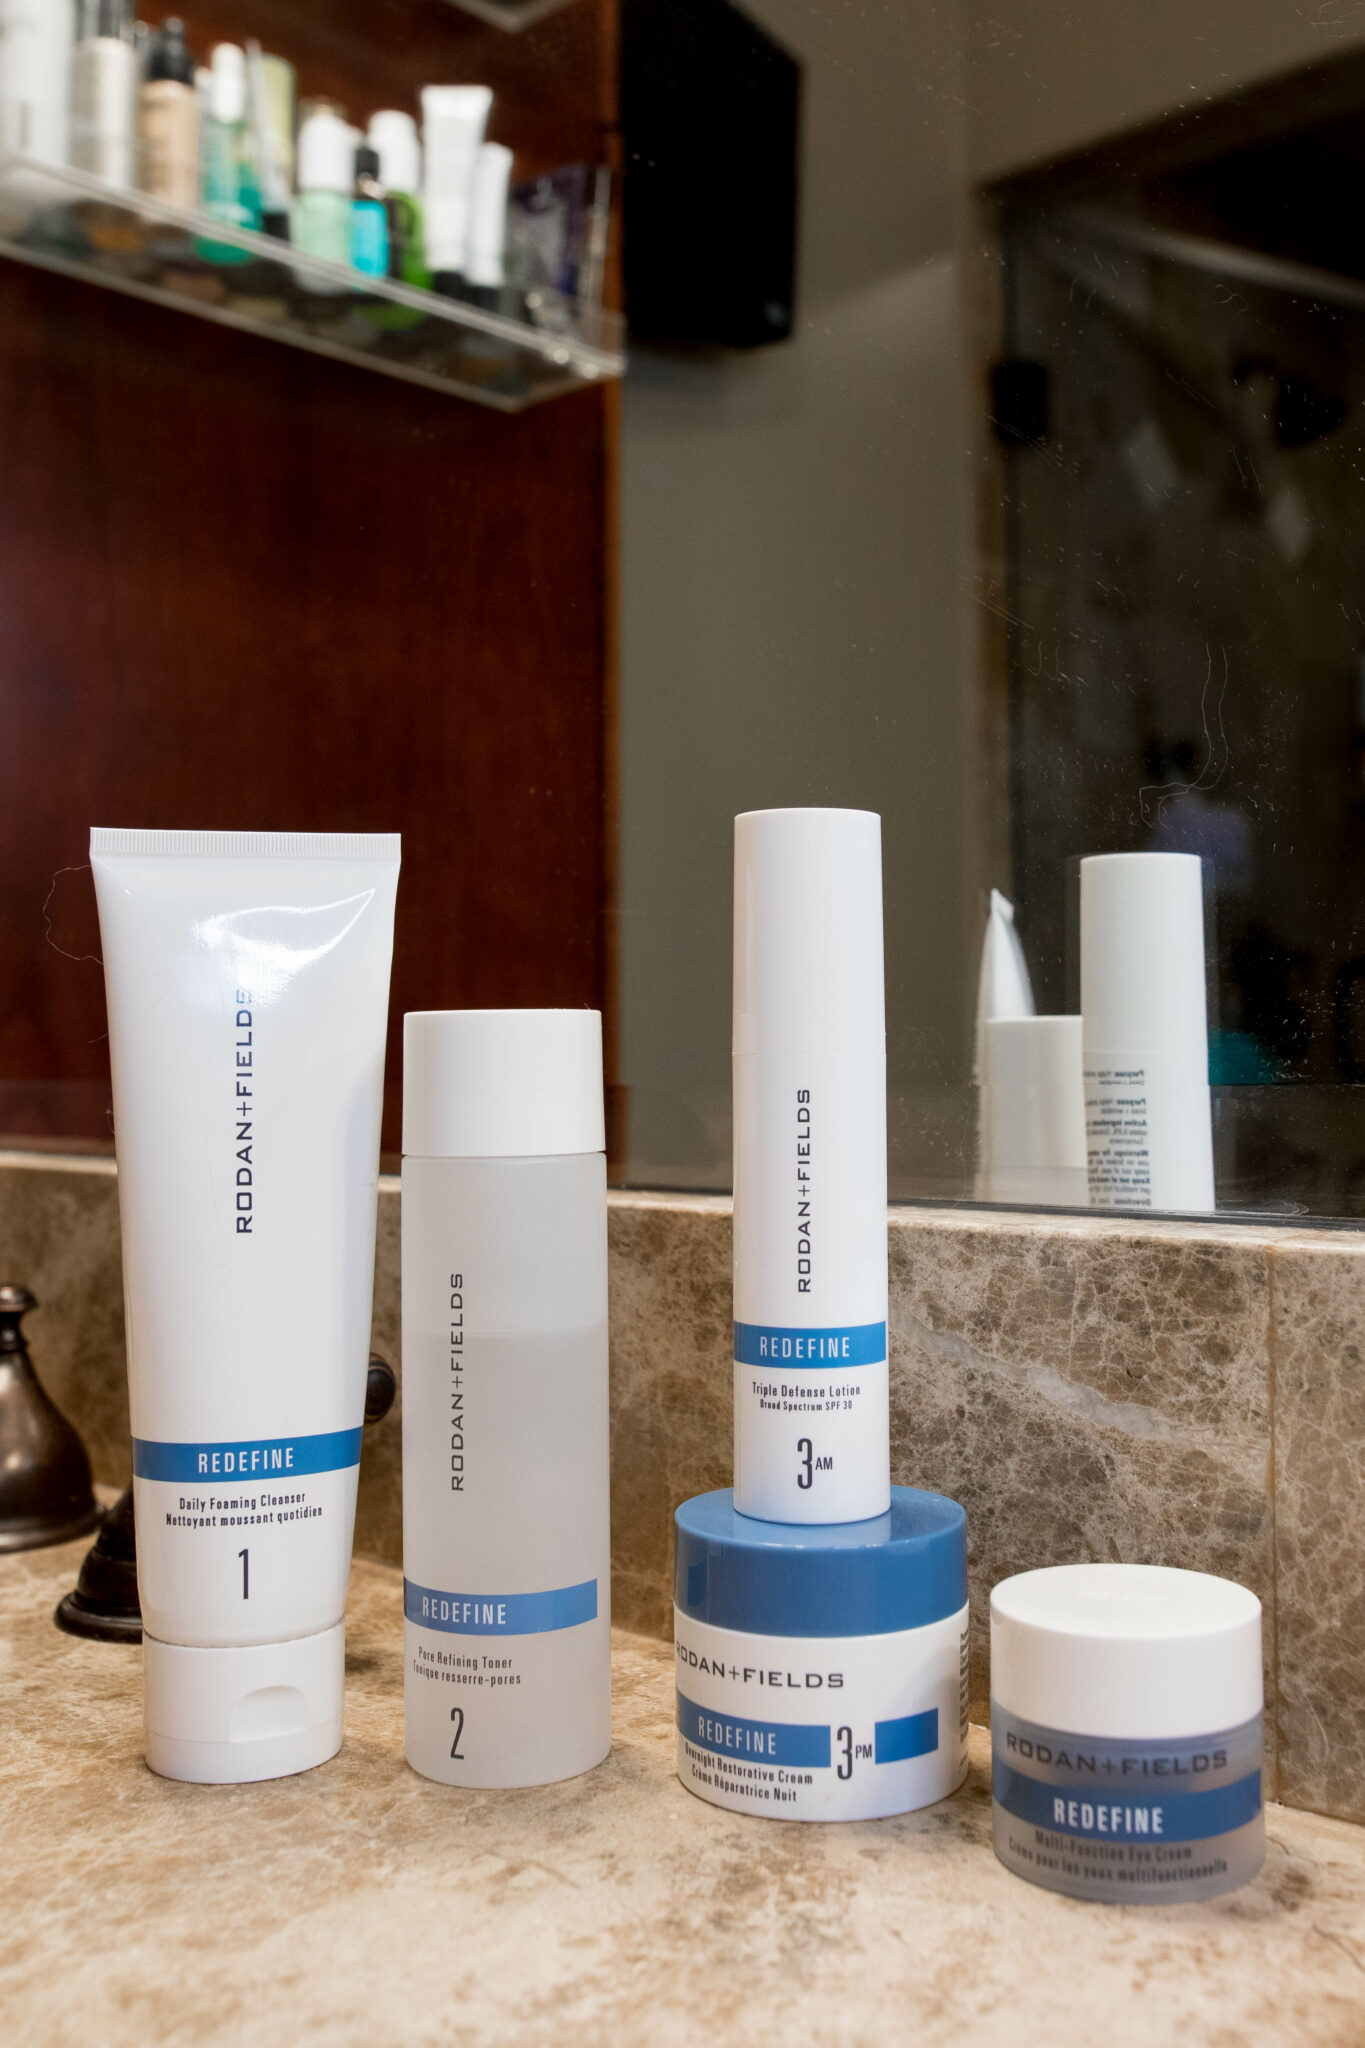 Rodan and Fields Redefine Regimen by popular Chicago beauty blog, Glass of Glam: image of the Rodan and Fields Redefine regimen products. 